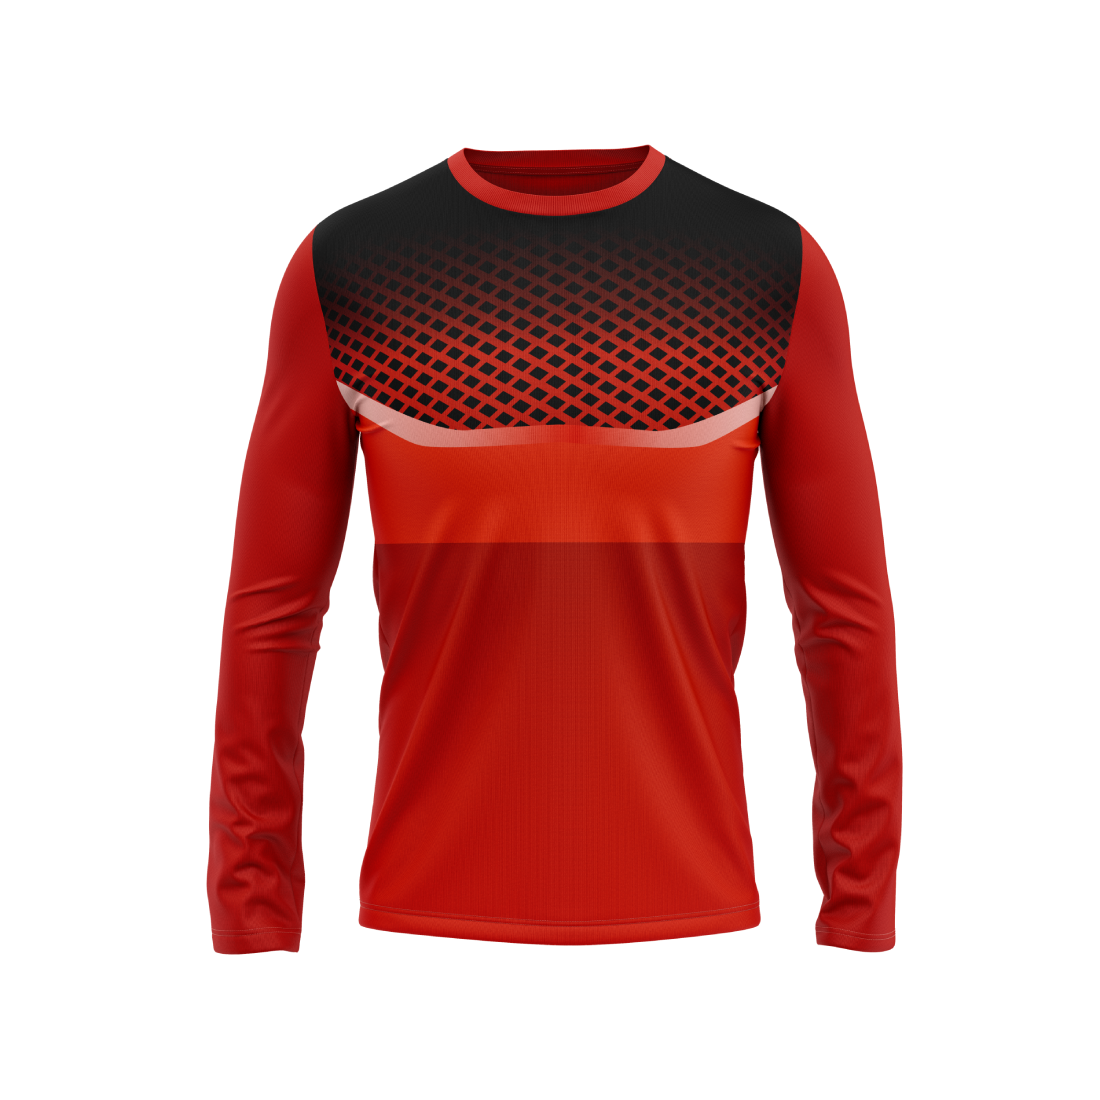 Round Neck Fullsleeve Printed Jersey Red NP5000013